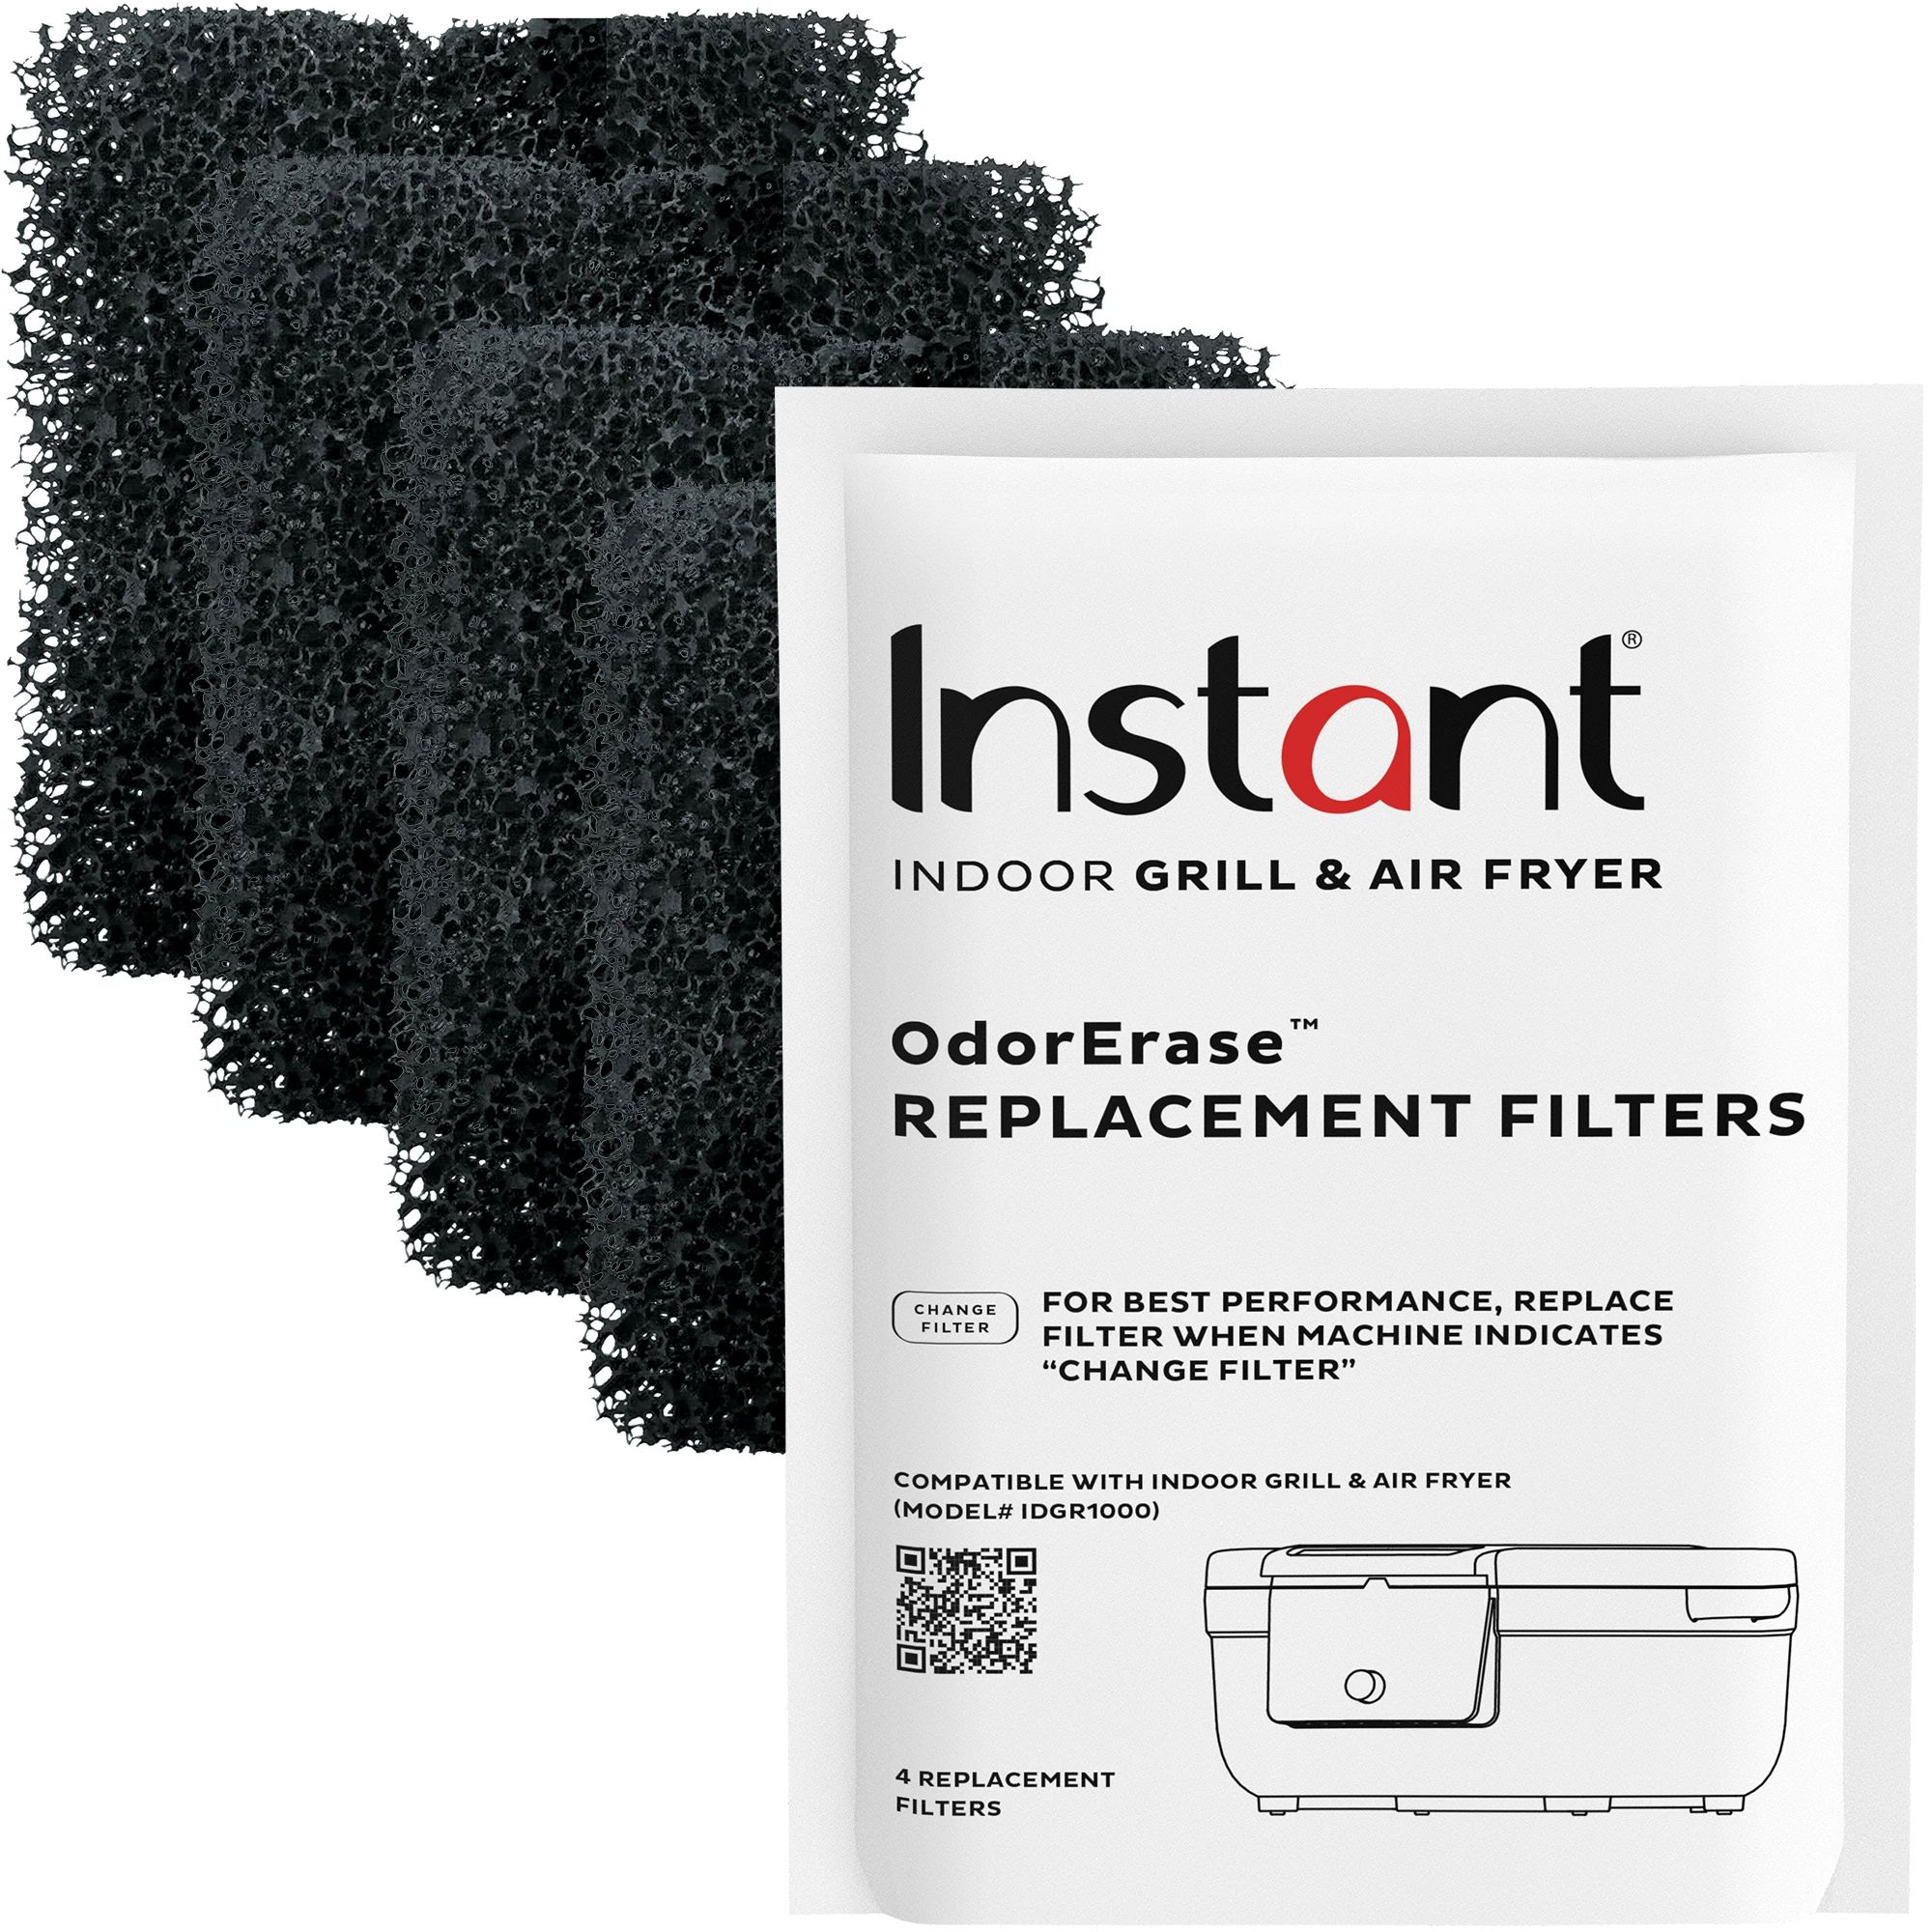 How to Change the OdourErase Air Filters - Instant